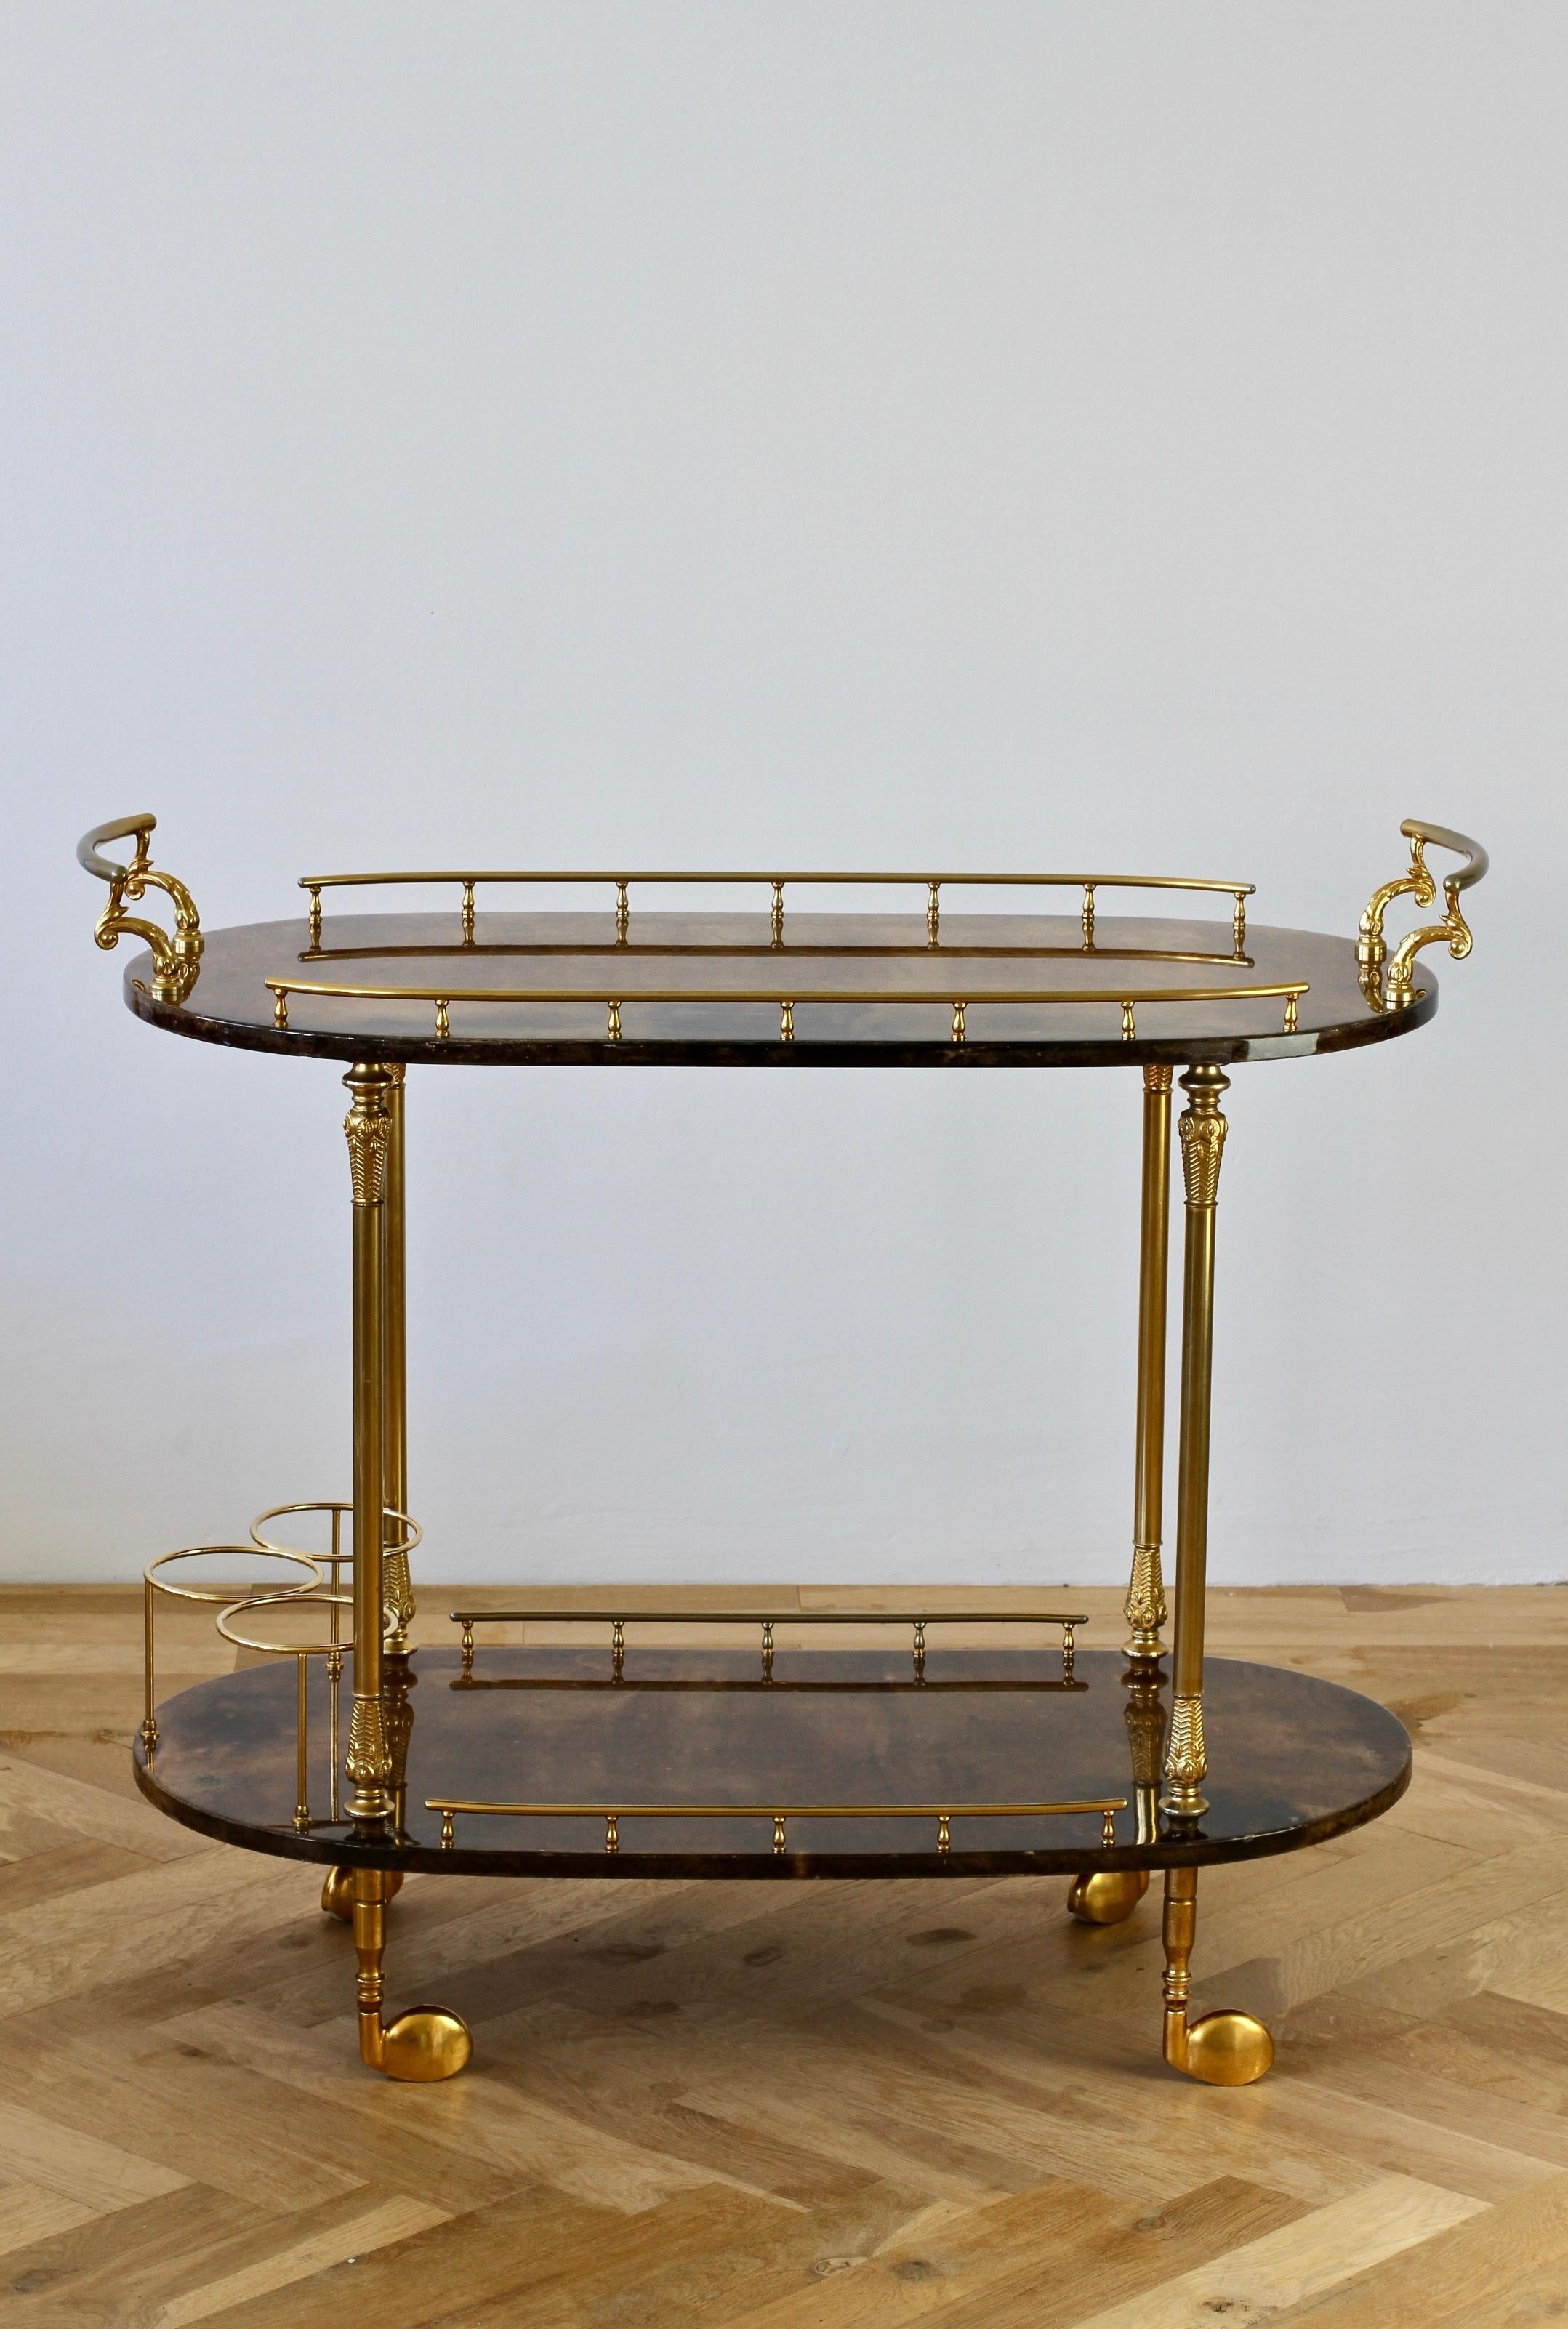 Large midcentury Italian 1950s bar cart, tea trolley or drinks stand by Aldo Tura, Milan. The brown colored and lacquered goatskin leather combined with gilded cast metal handles, rails and finals is perfect for any Mid-Century or Hollywood Regency